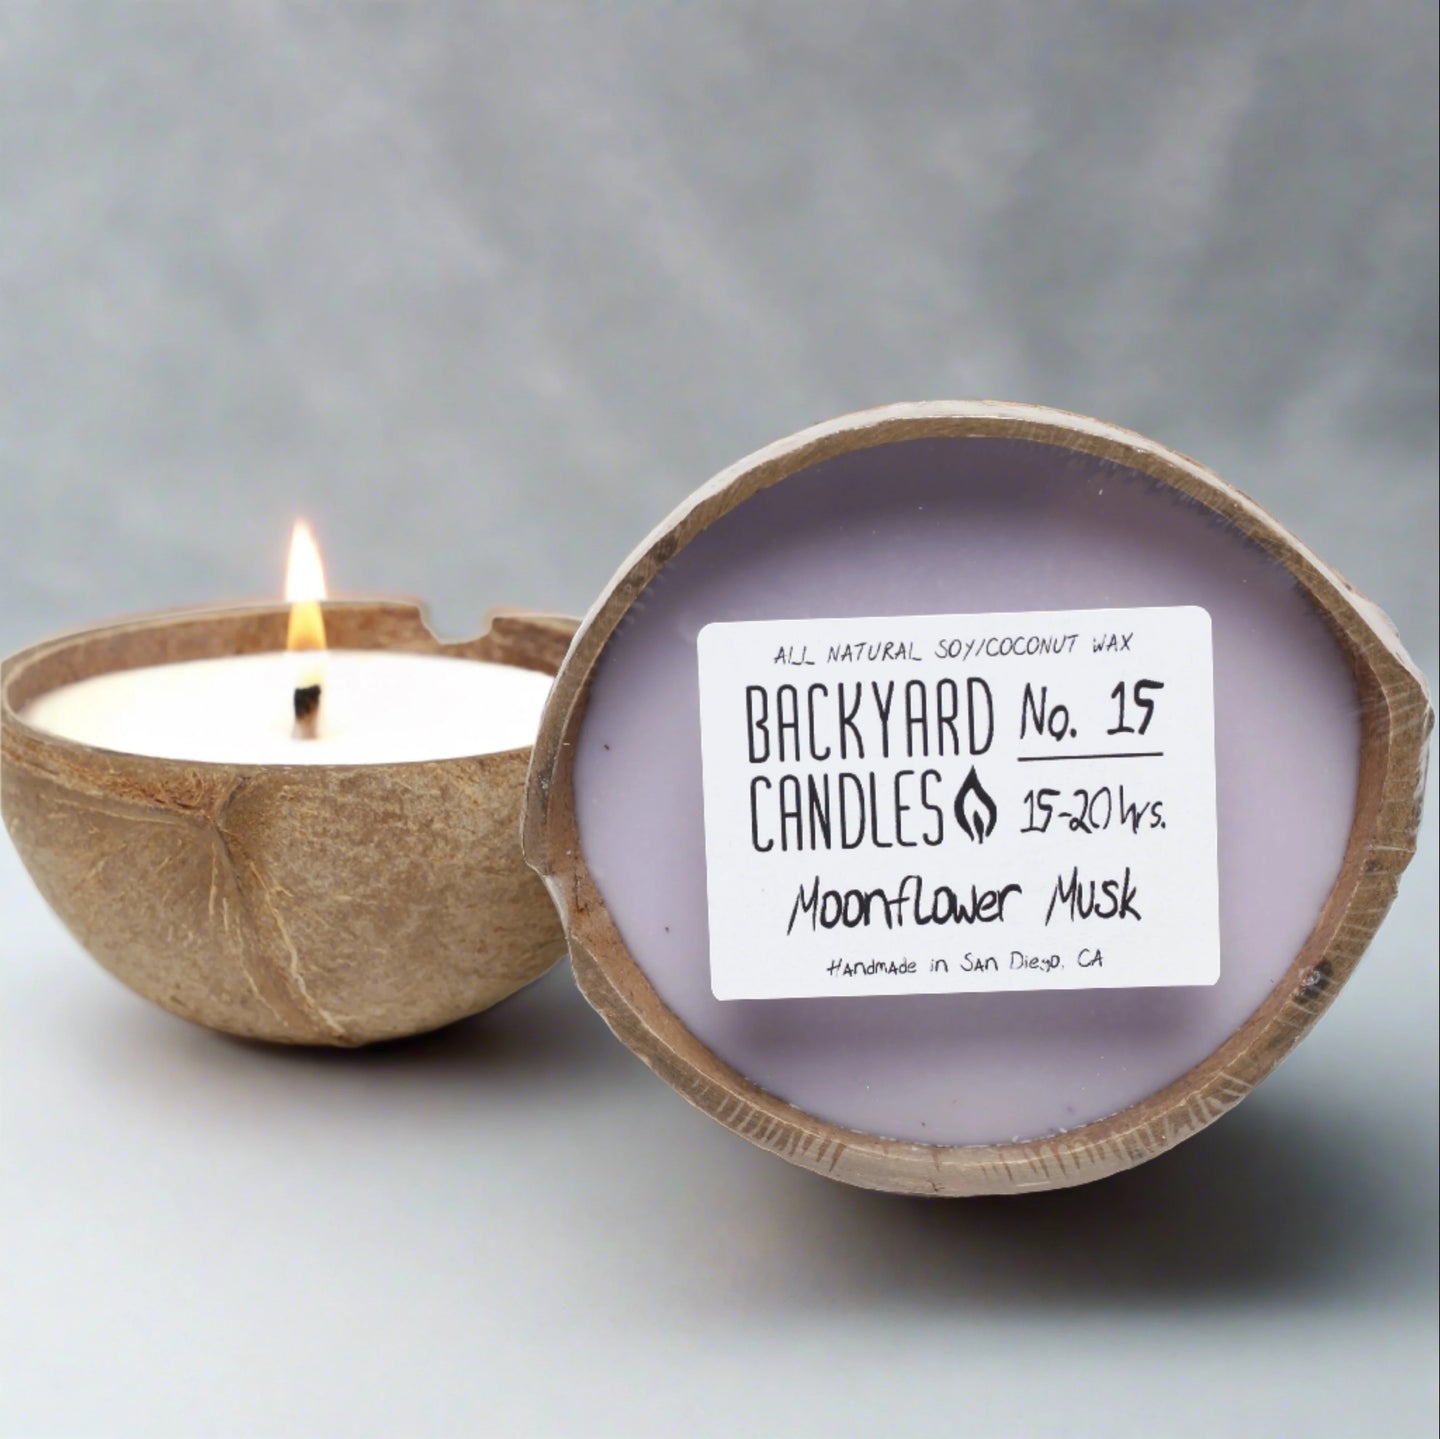 Backyard Candles 5.5oz Coconut Shell Candle-Moonflower Musk